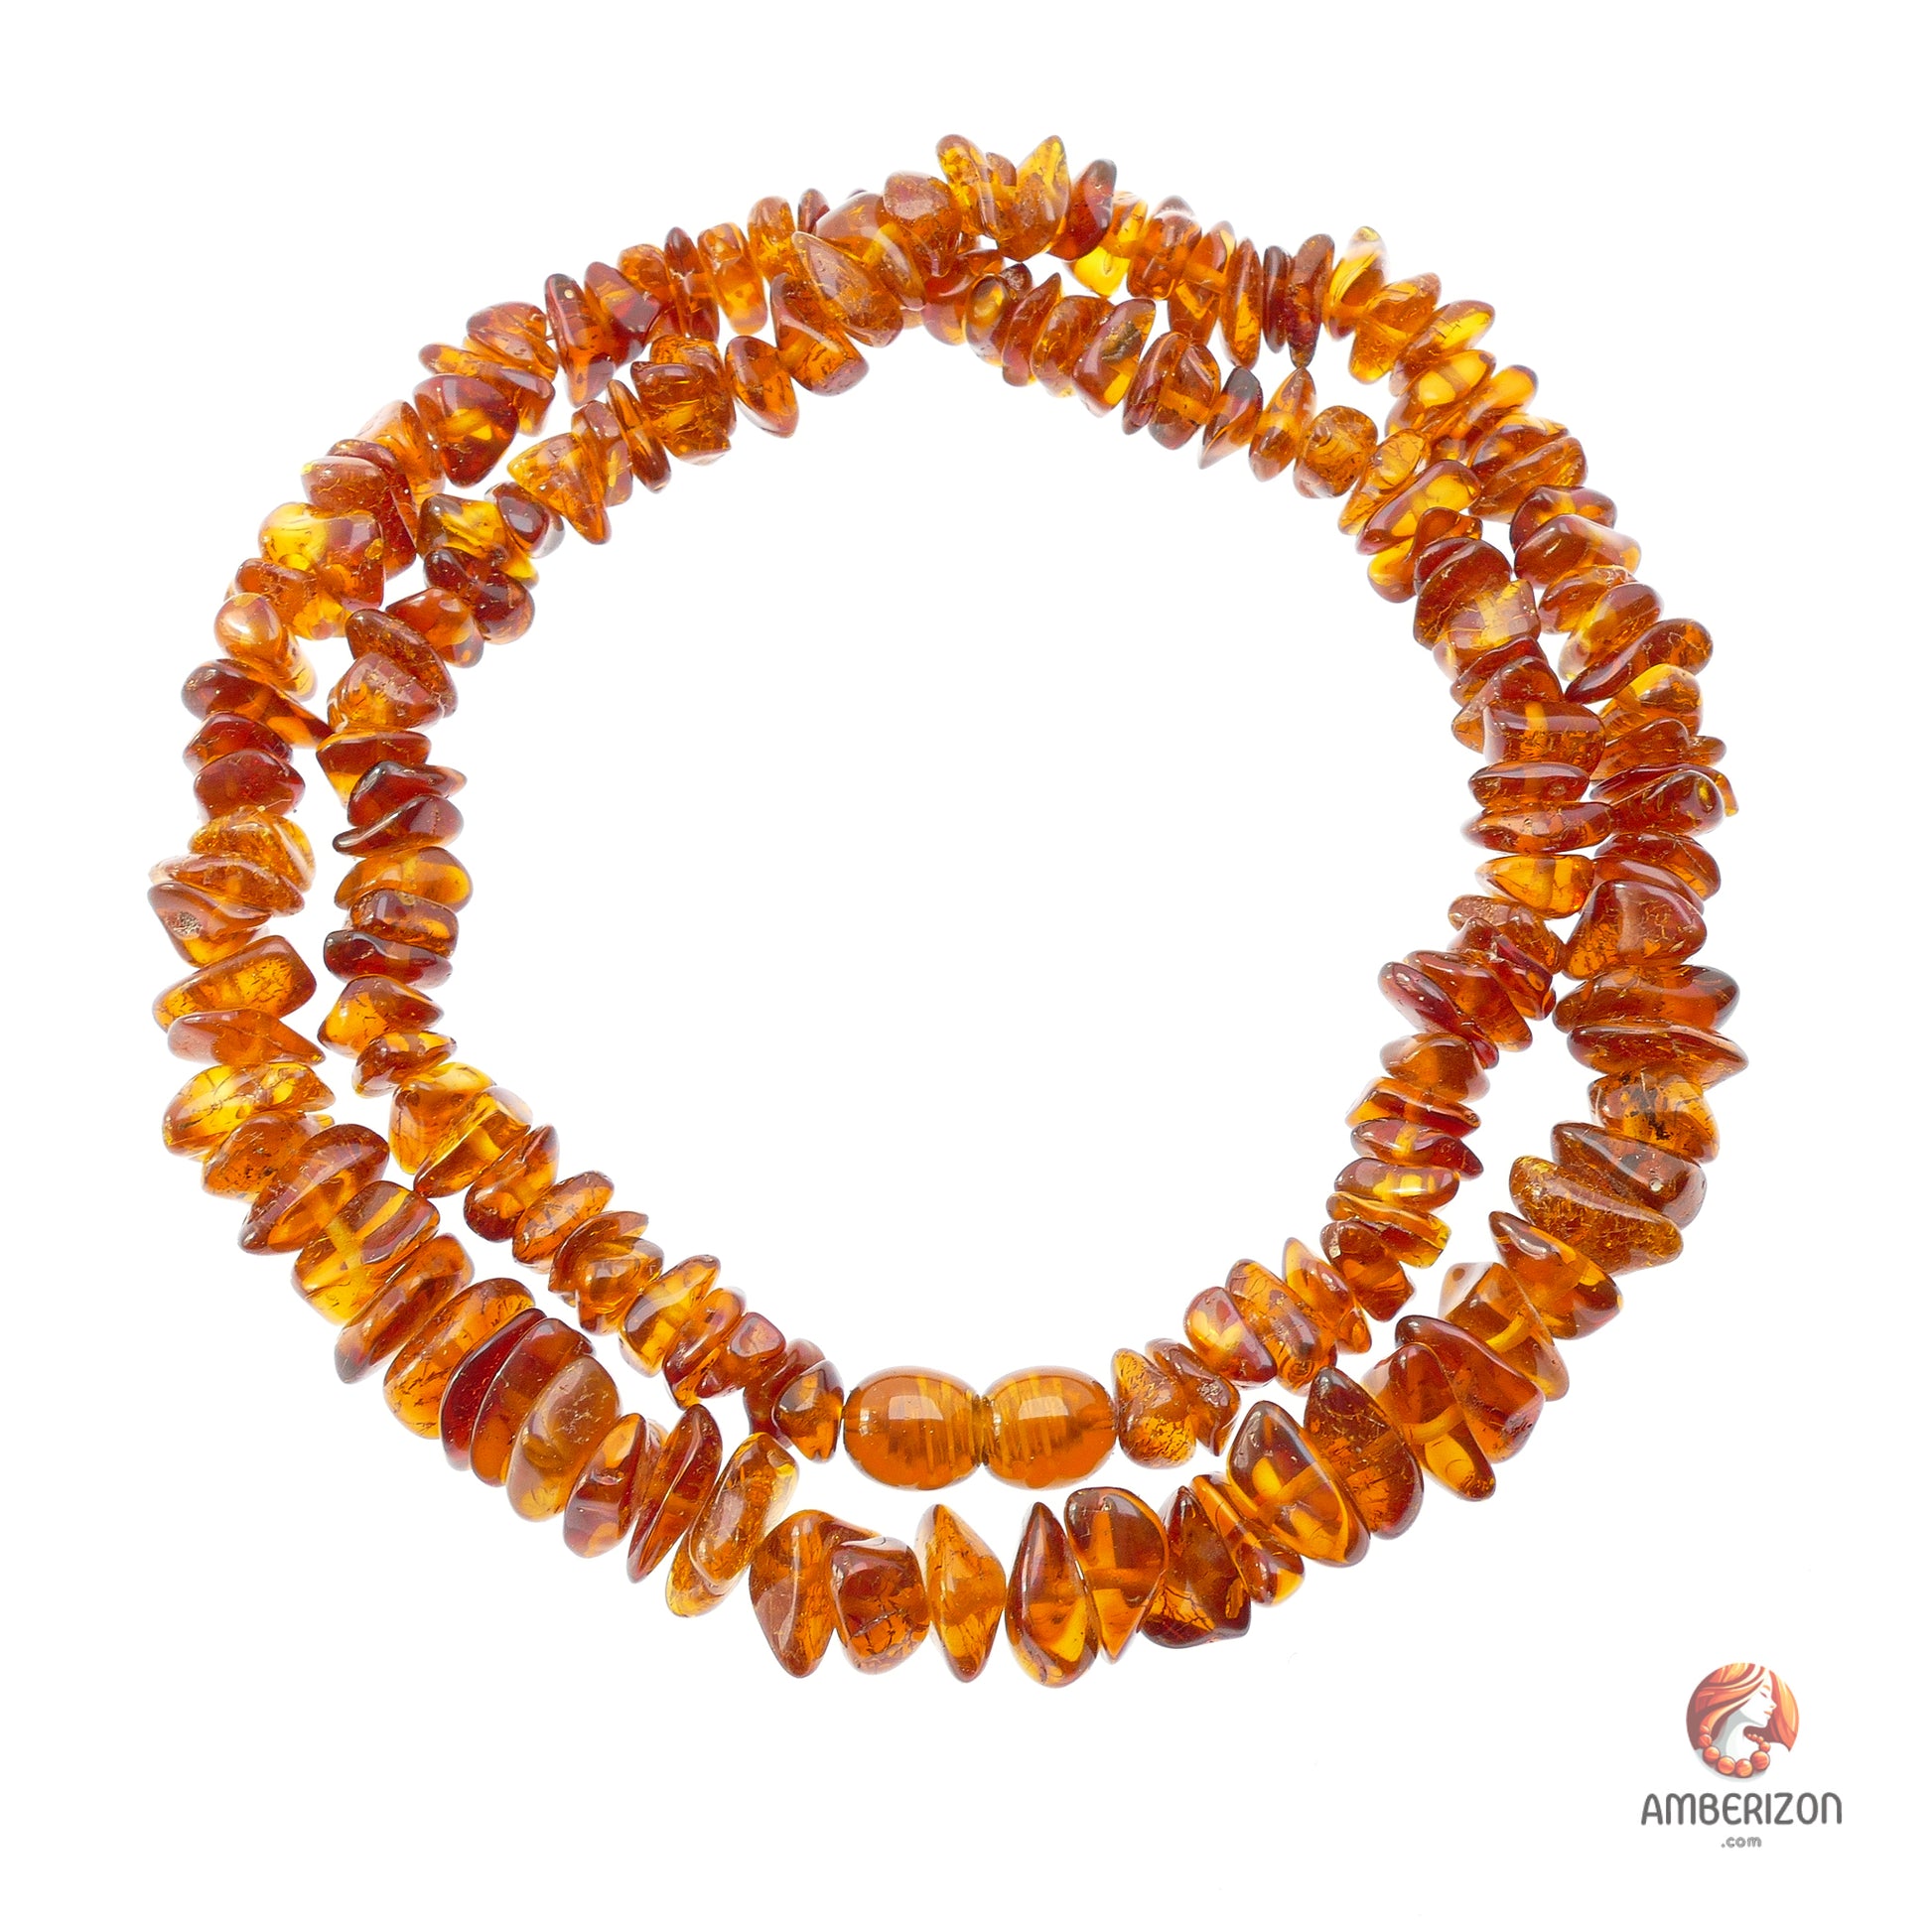 Amber chip necklace with cognac beads - Minimalist Women's Beaded Amber Jewelry - Clear Amber Beads